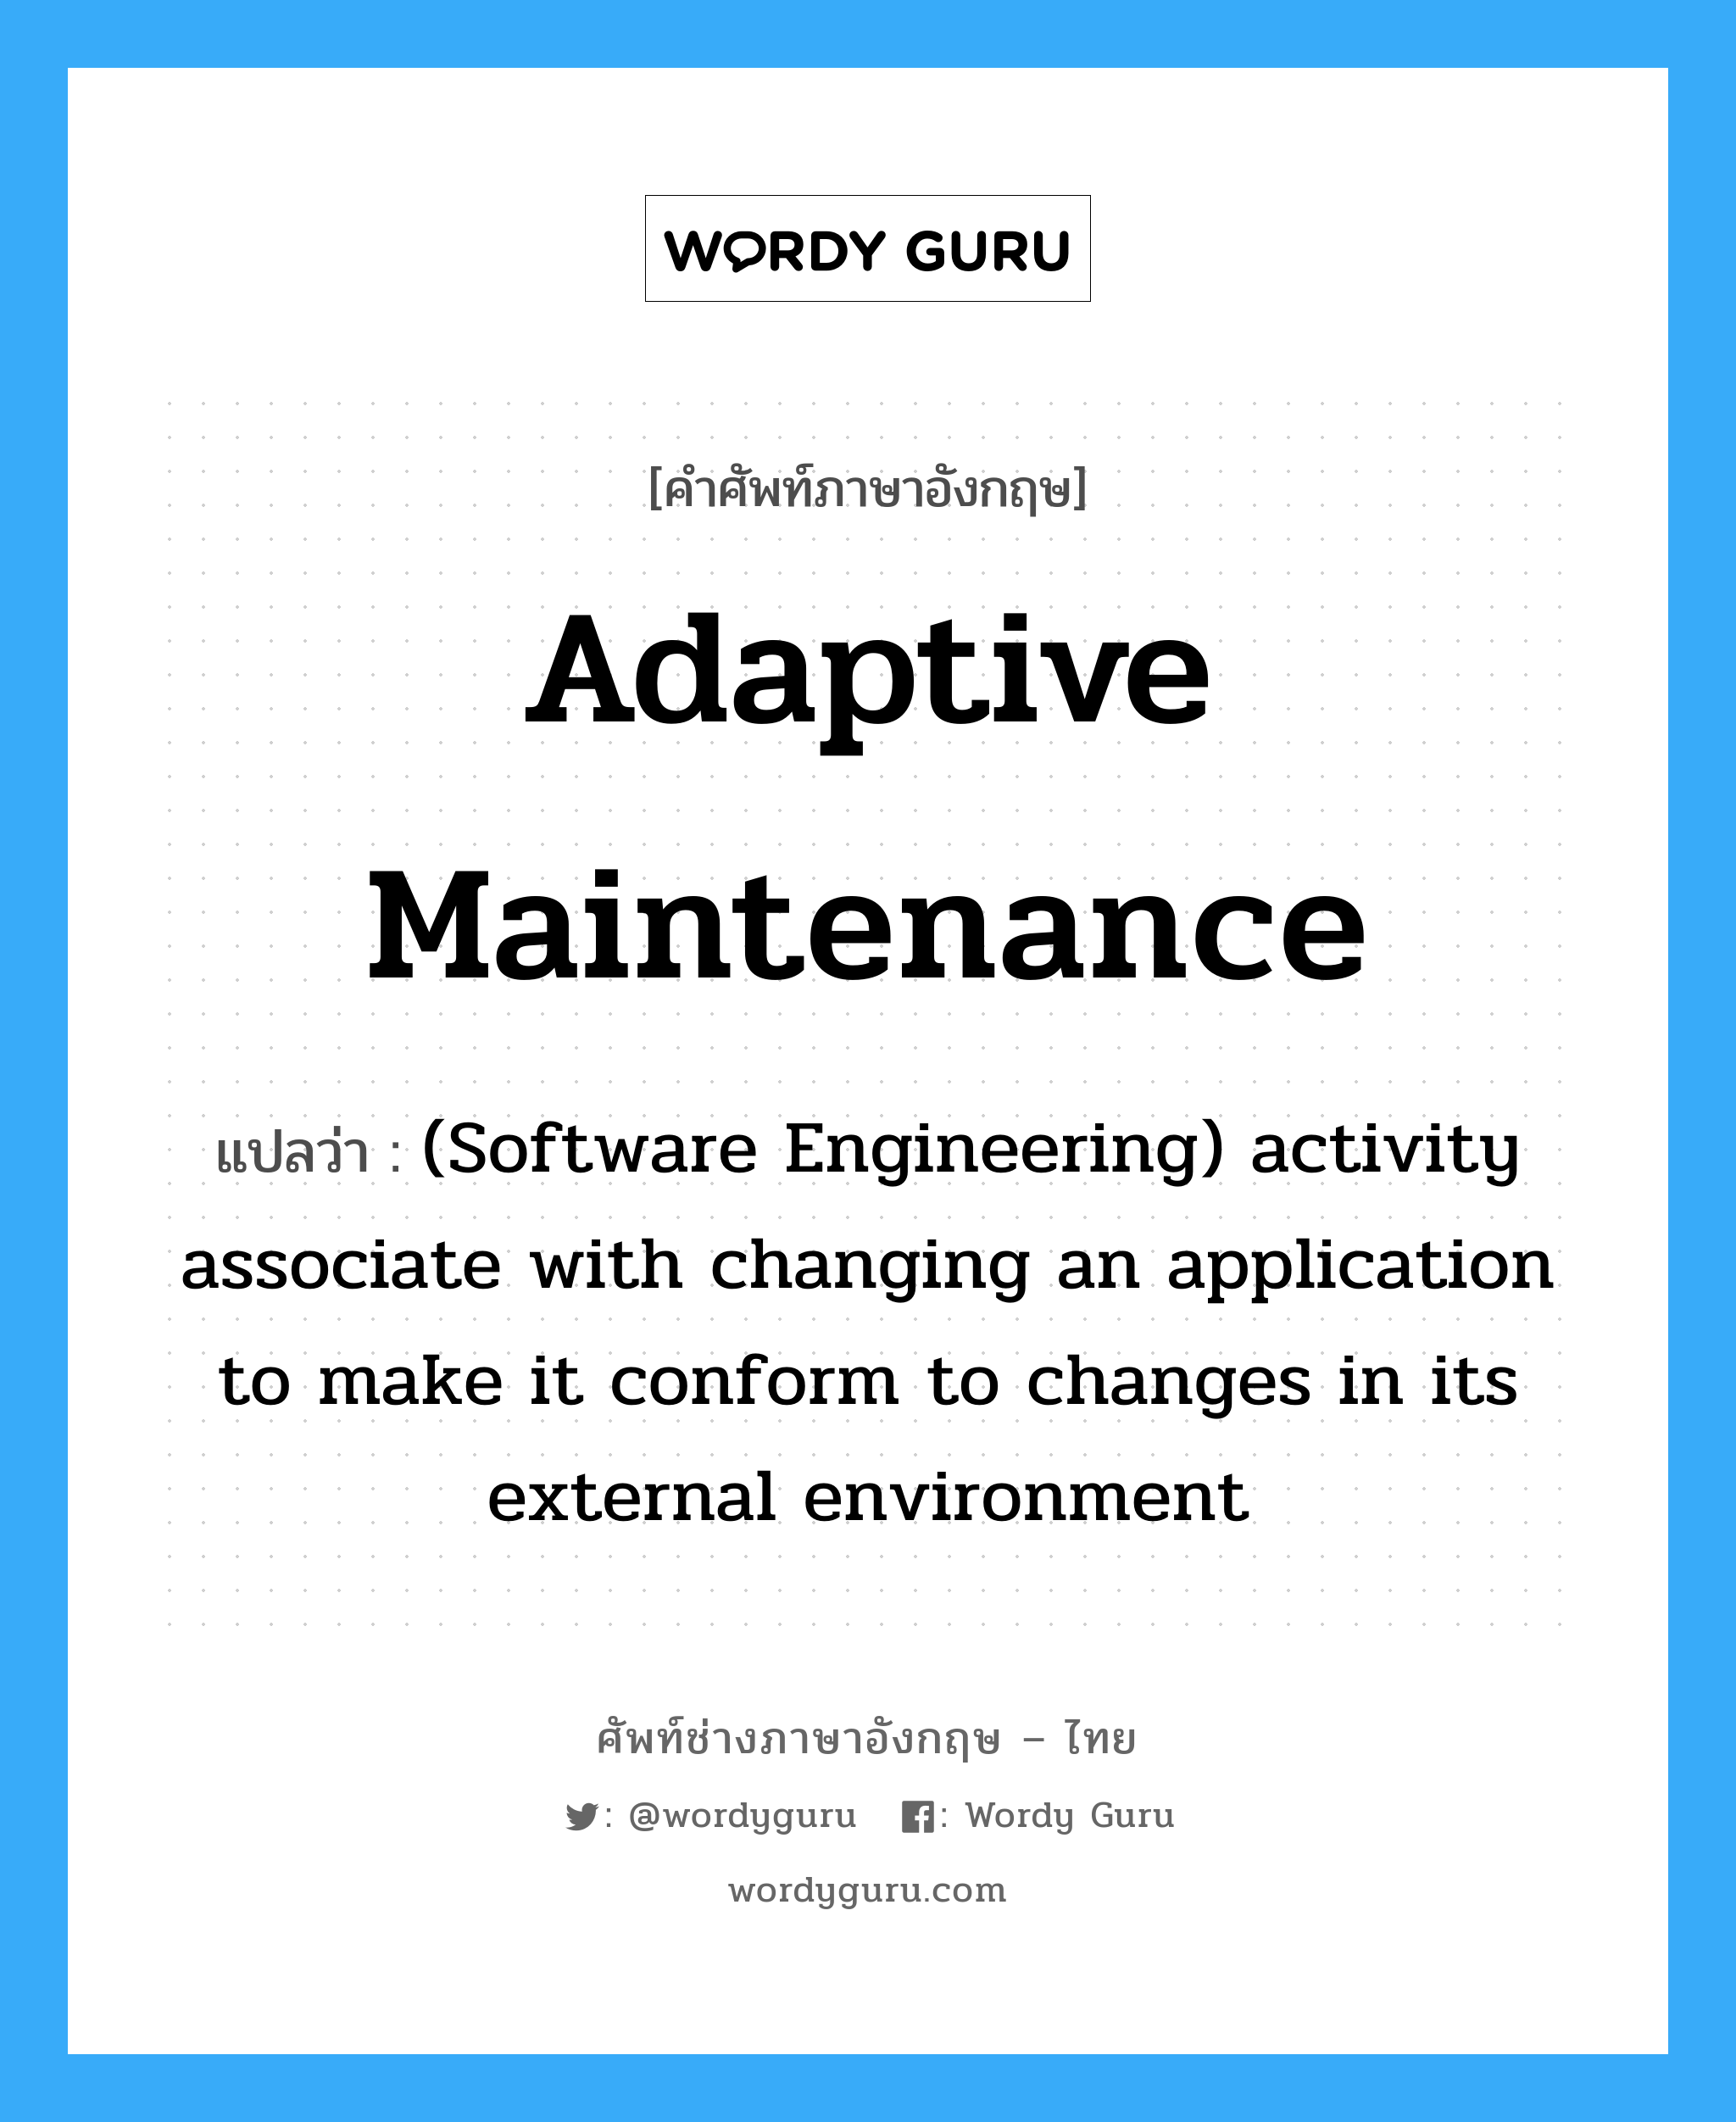 Adaptive maintenance แปลว่า?, คำศัพท์ช่างภาษาอังกฤษ - ไทย Adaptive maintenance คำศัพท์ภาษาอังกฤษ Adaptive maintenance แปลว่า (Software Engineering) activity associate with changing an application to make it conform to changes in its external environment